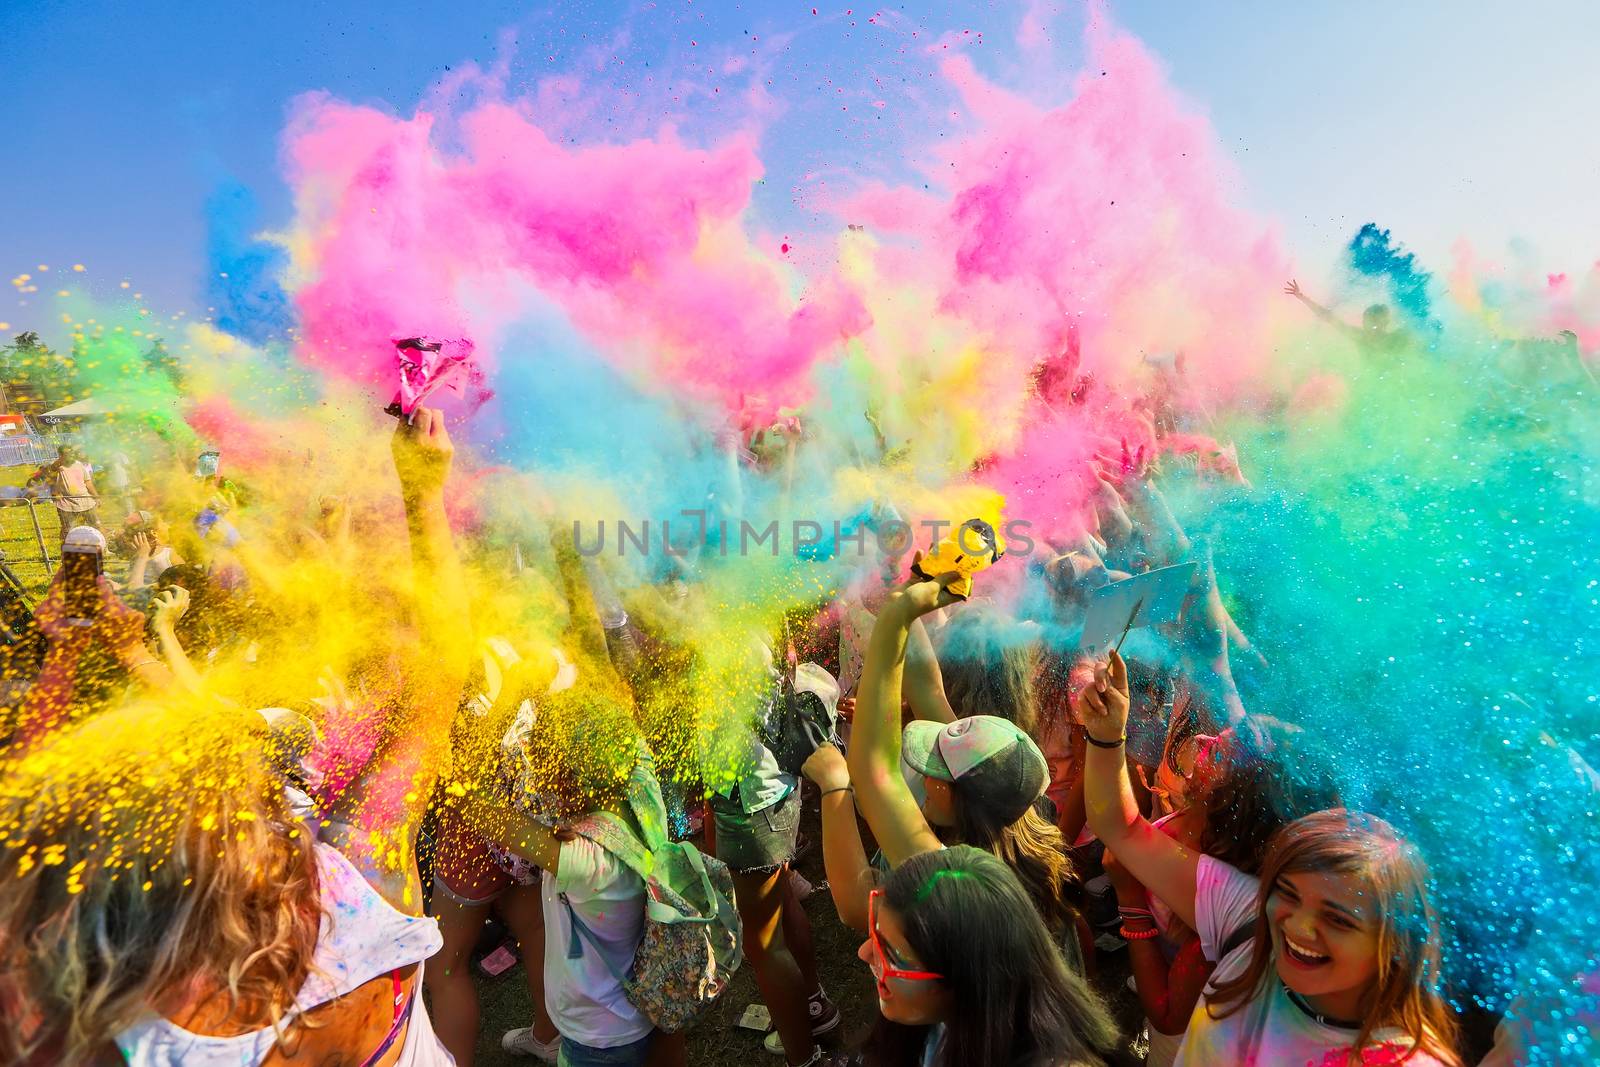 Thessaloniki, Greece - September 2, 2018: Crowds of unidentified people throw colour powder during the "Day of Colours" annual event.